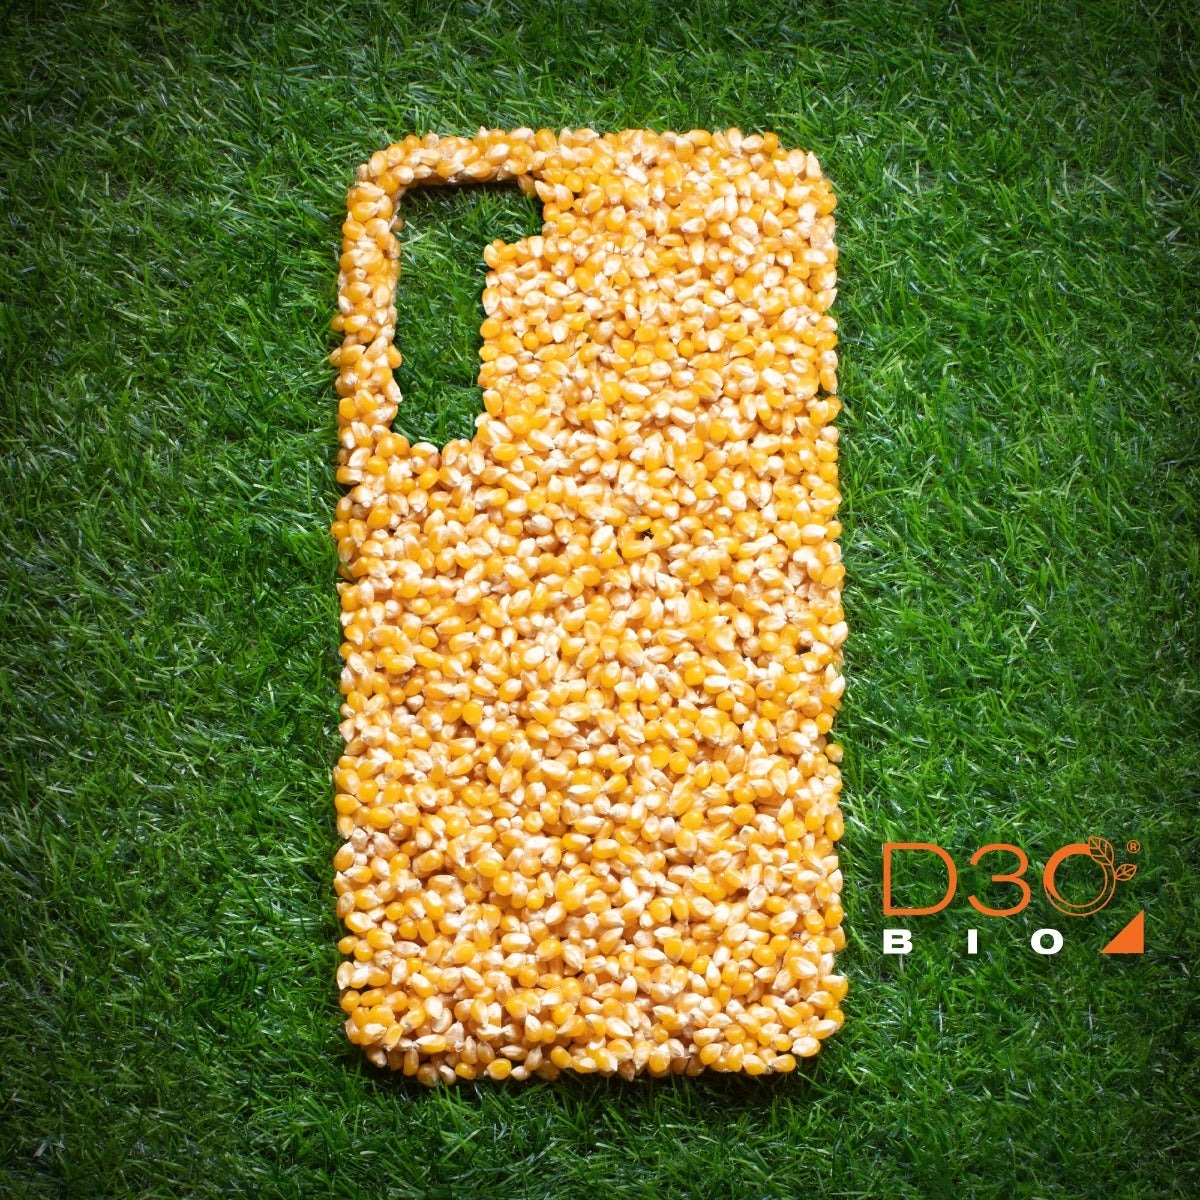 Made with D3O® Bio||D3O® Bio is a plant-based protection material made with 45% renewable resources, as opposed to fossil-based resources.